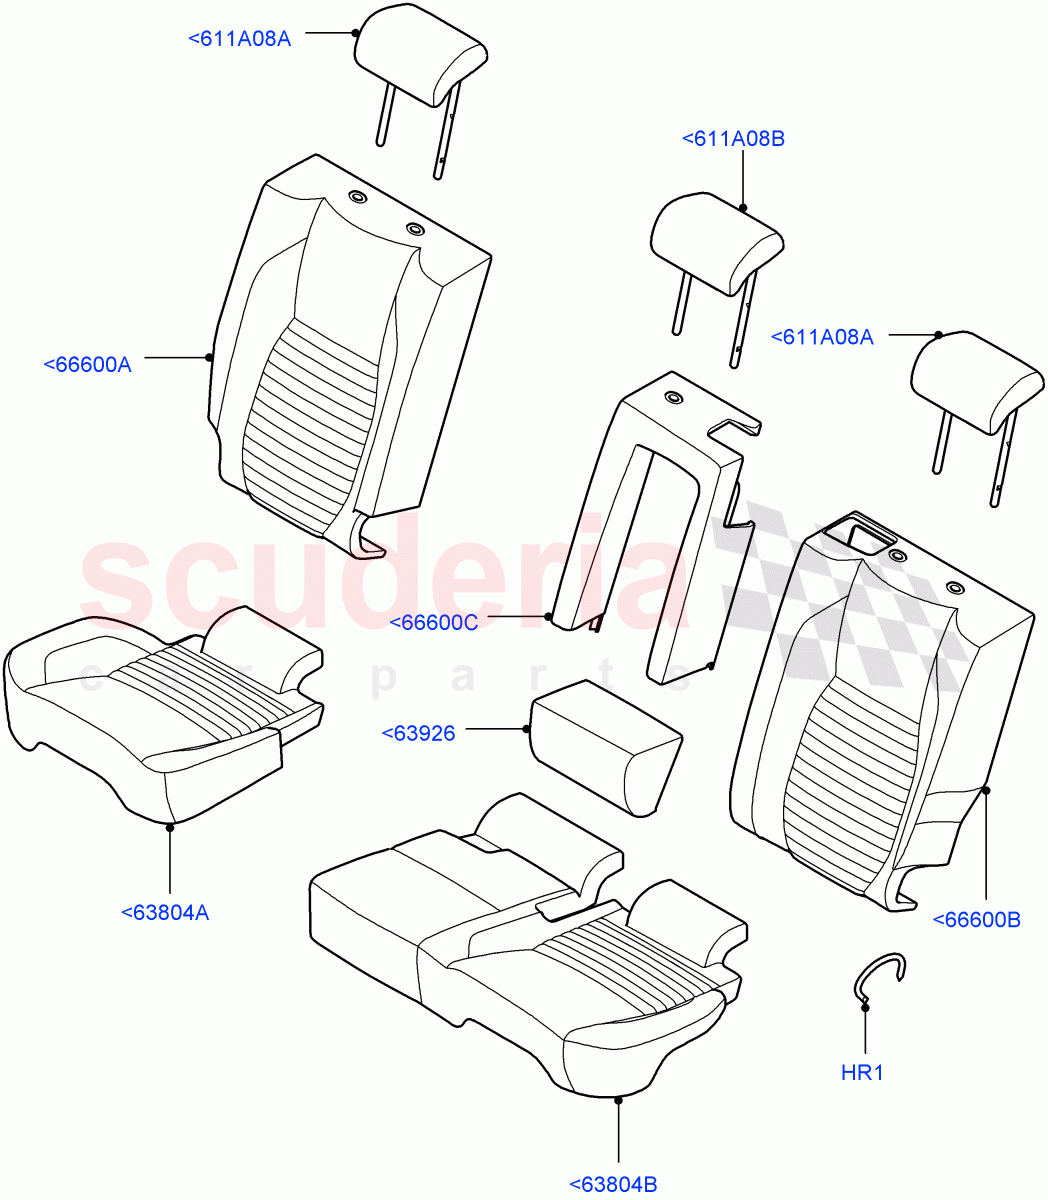 Rear Seat Covers(Taurus Leather Perforated,Itatiaia (Brazil),60/40 Load Through With Slide)((V)FROMLT000001) of Land Rover Land Rover Discovery Sport (2015+) [2.0 Turbo Diesel]